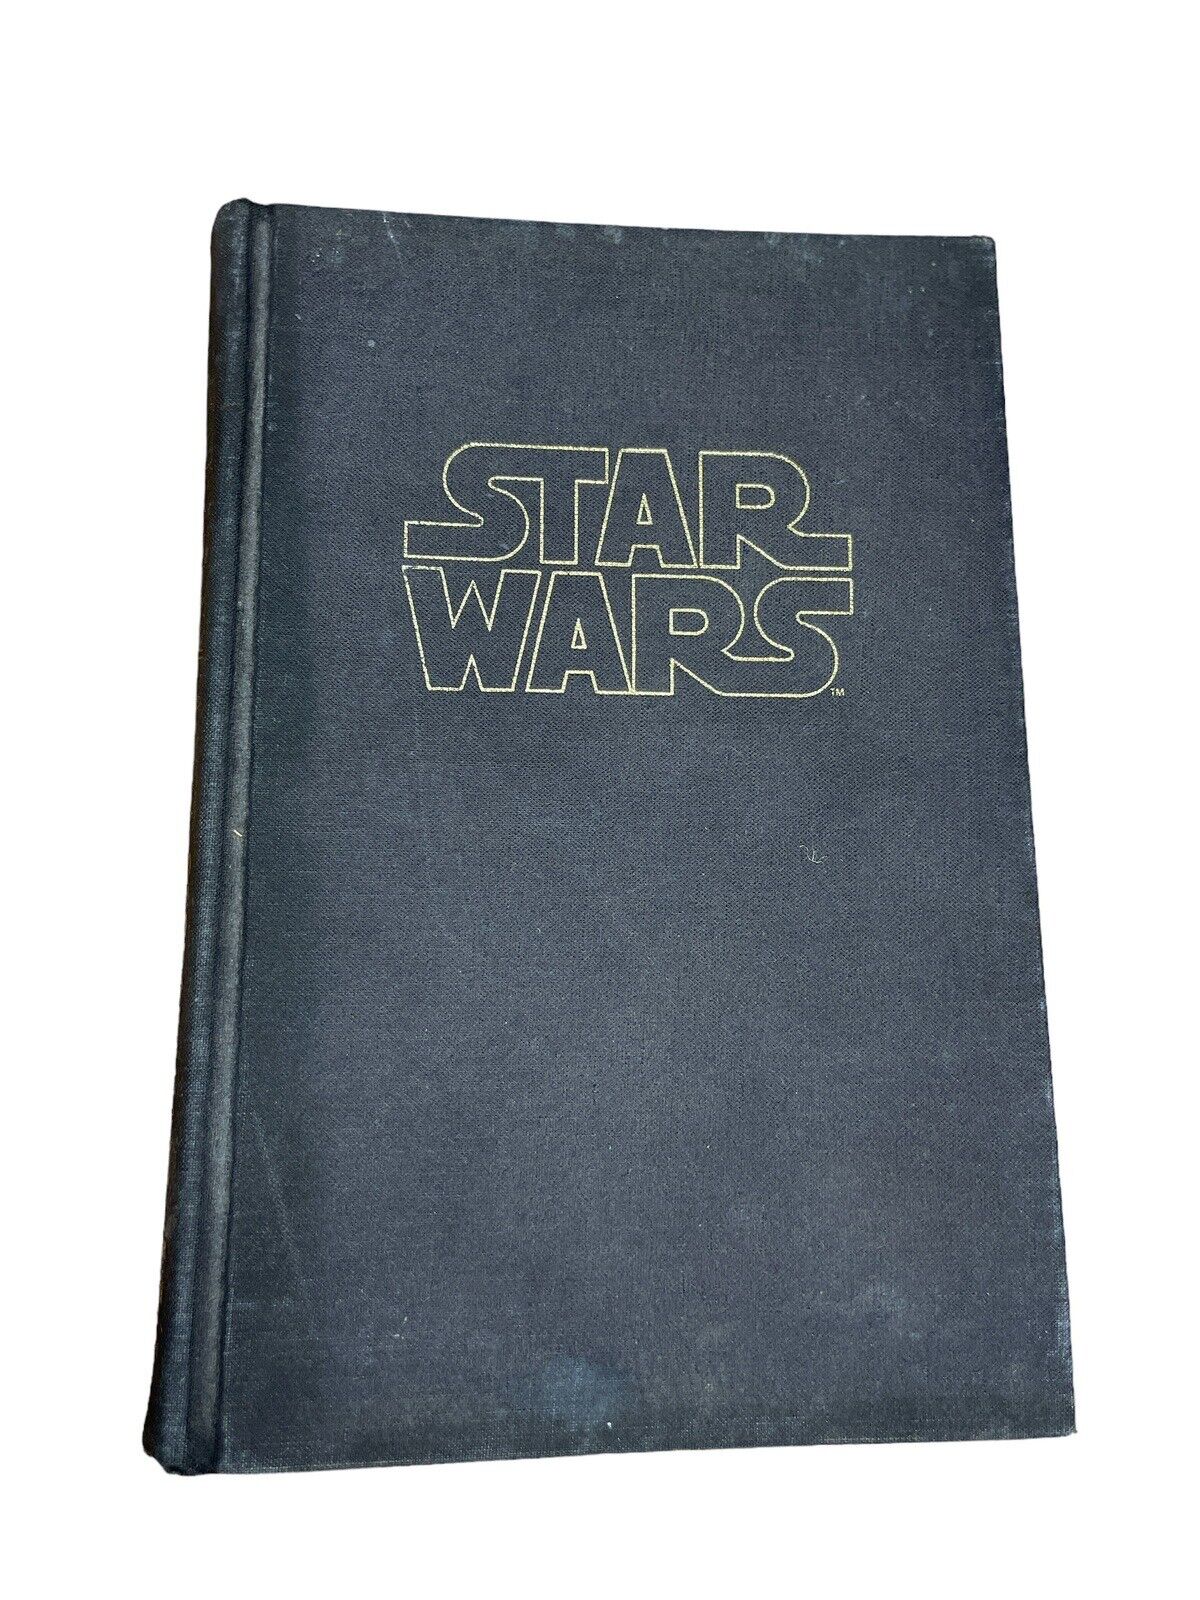 George Lucas / Star Wars From the Adventures of Luke Skywalker 1977 Rare Edition